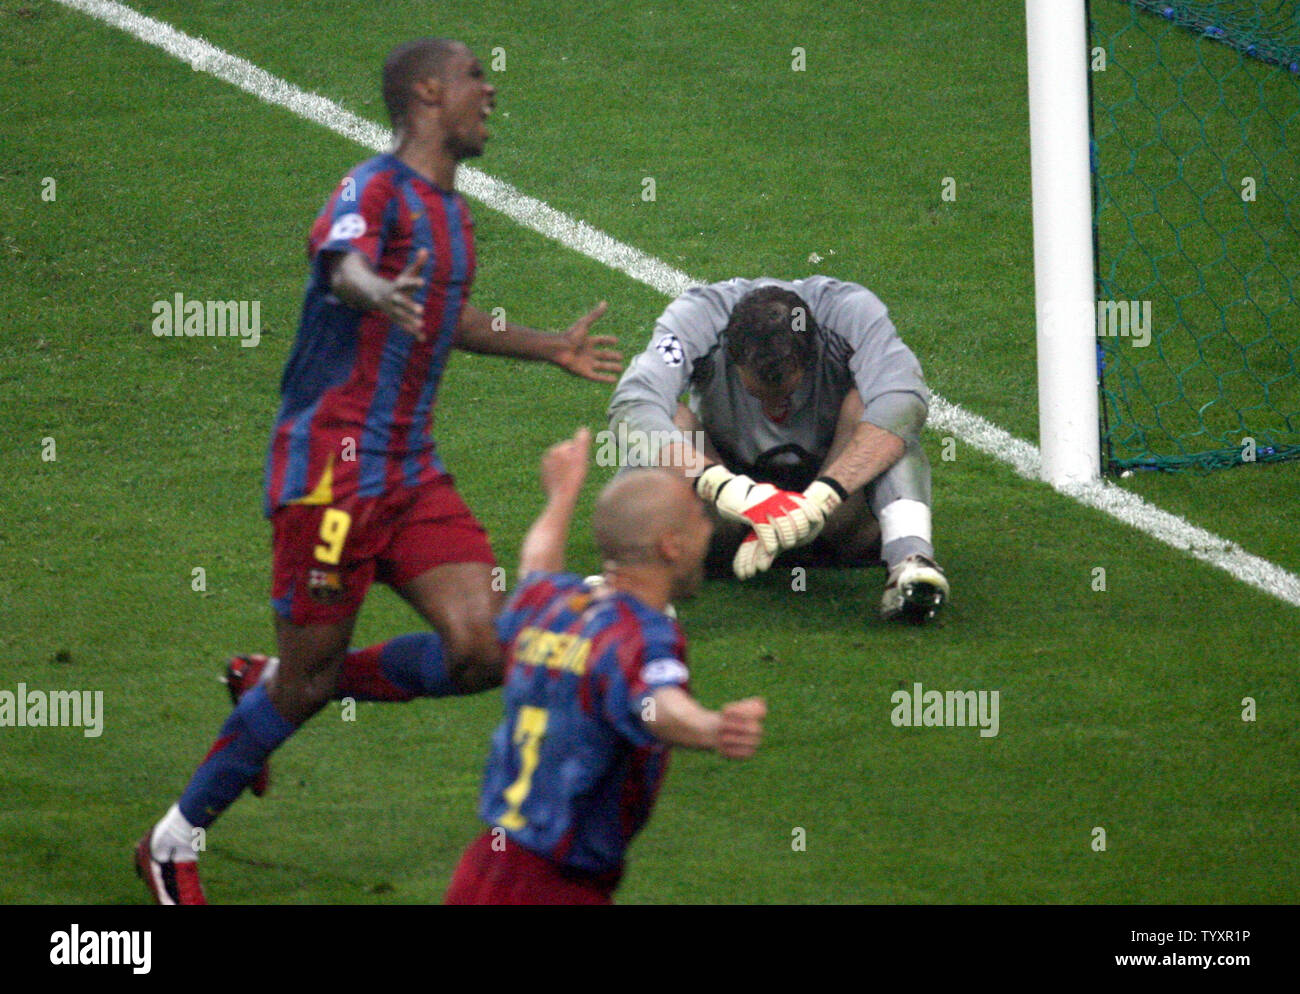 FC Barcelona Henrik Larsoon (C) and Samuel Eto'o celebrate after scoring a goal past dejected Arsenal FC goalkeeper Manuel Almunia during their UEFA Champions League soccer final at the Stade de France in Saint Denis, near Paris, May 17, 2006. Barcelona won 2-1. (UPI Photo/Eco Clement) Stock Photo